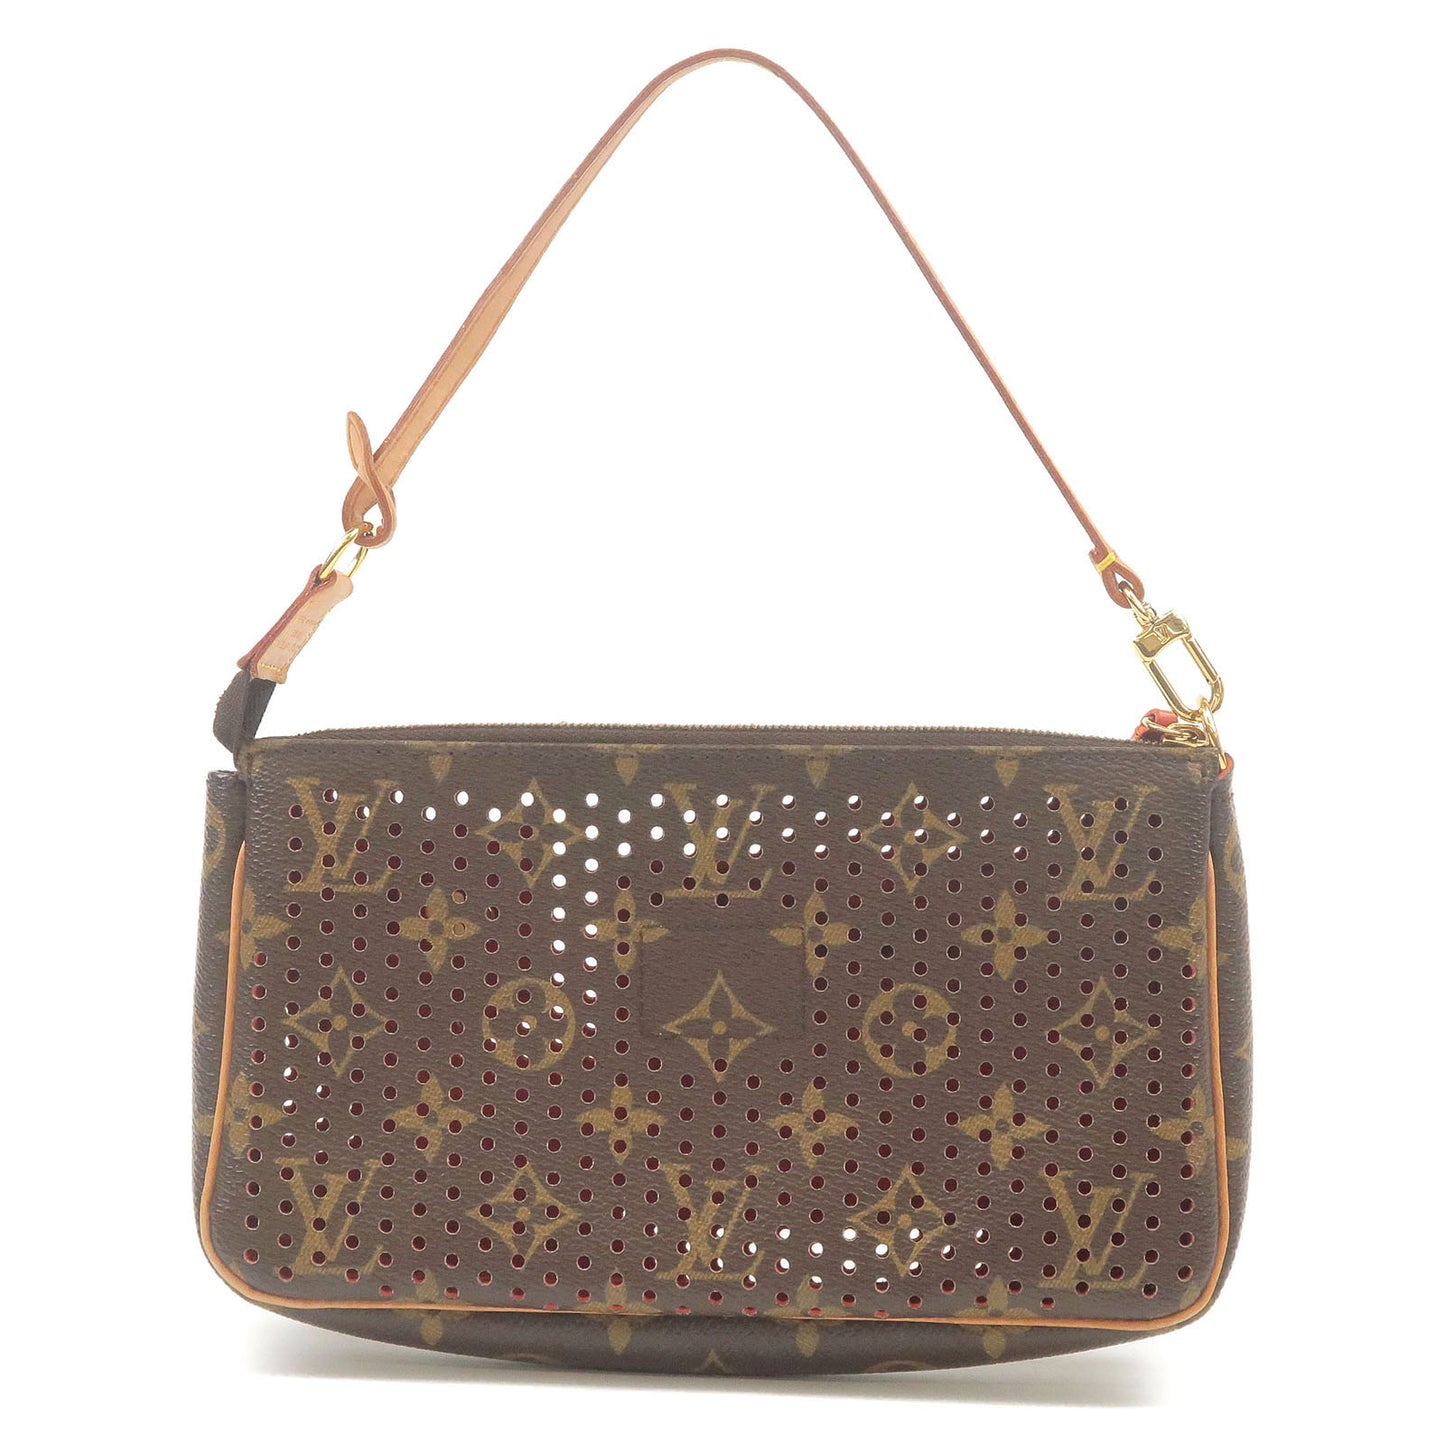 Louis Vuitton red perforated Monogram pre-owned leather case.